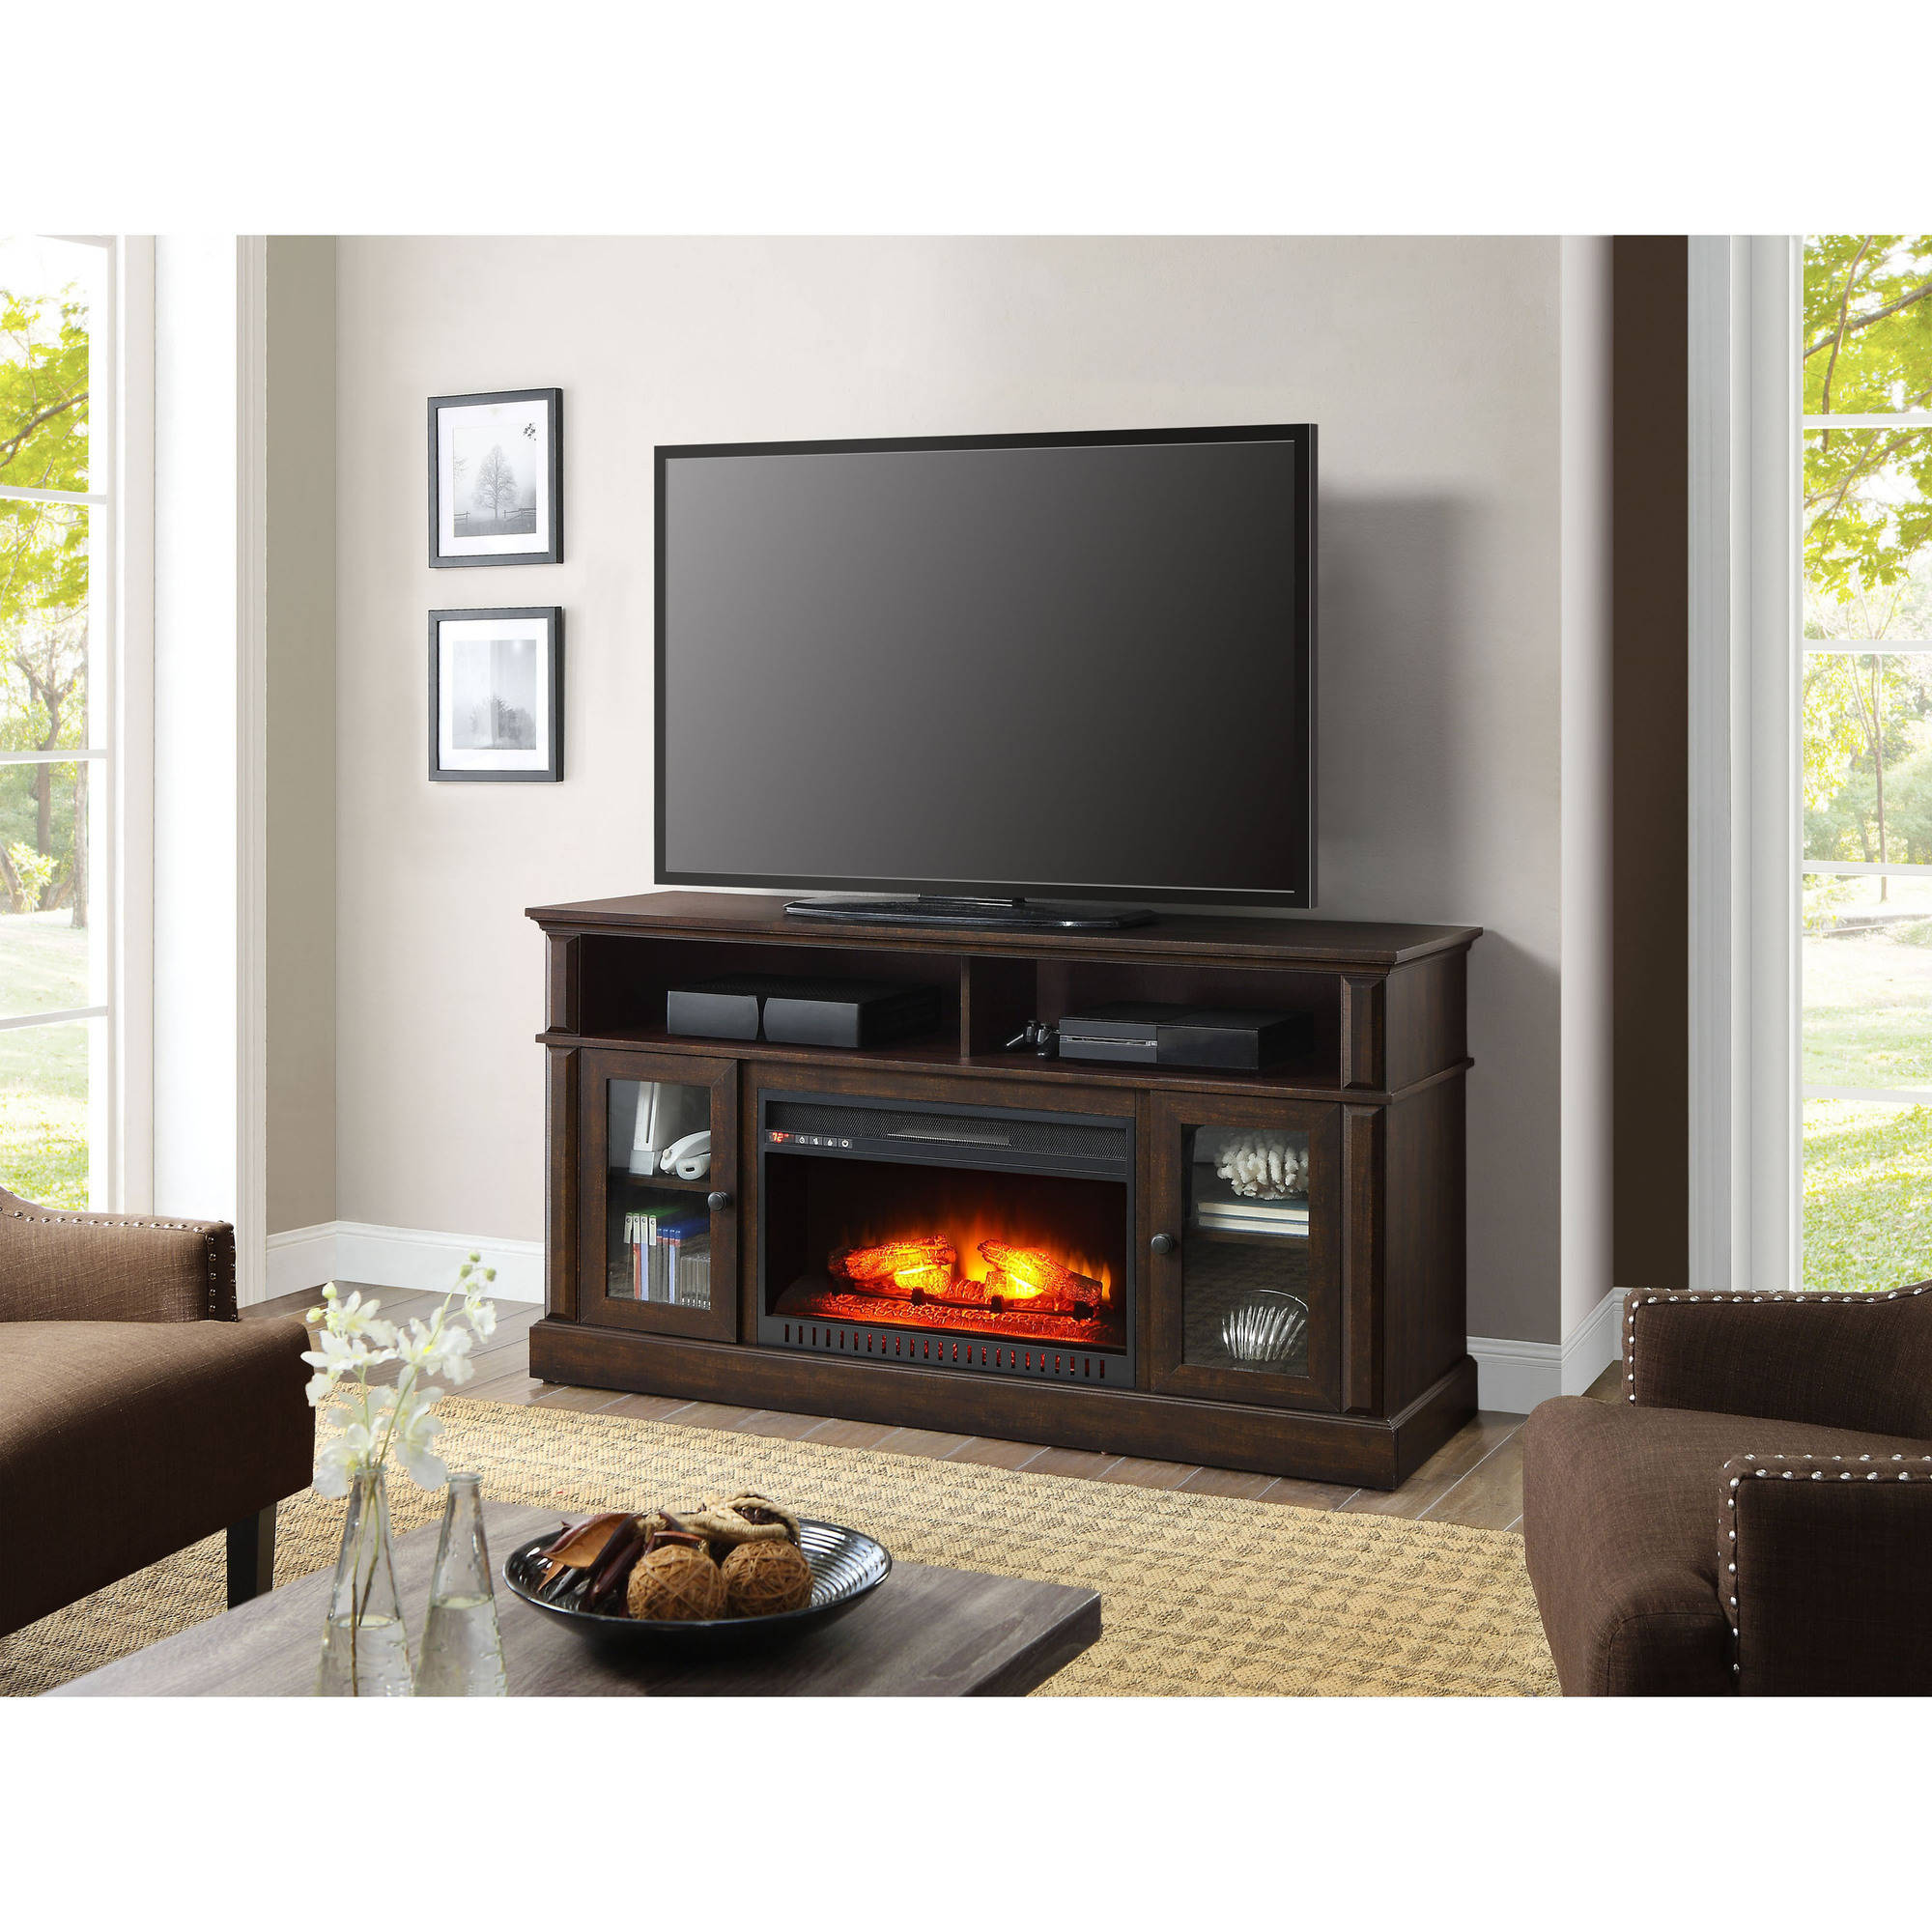 55 Inch Tv Stand with Fireplace Unique Whalen Barston Media Fireplace for Tv S Up to 70 Multiple